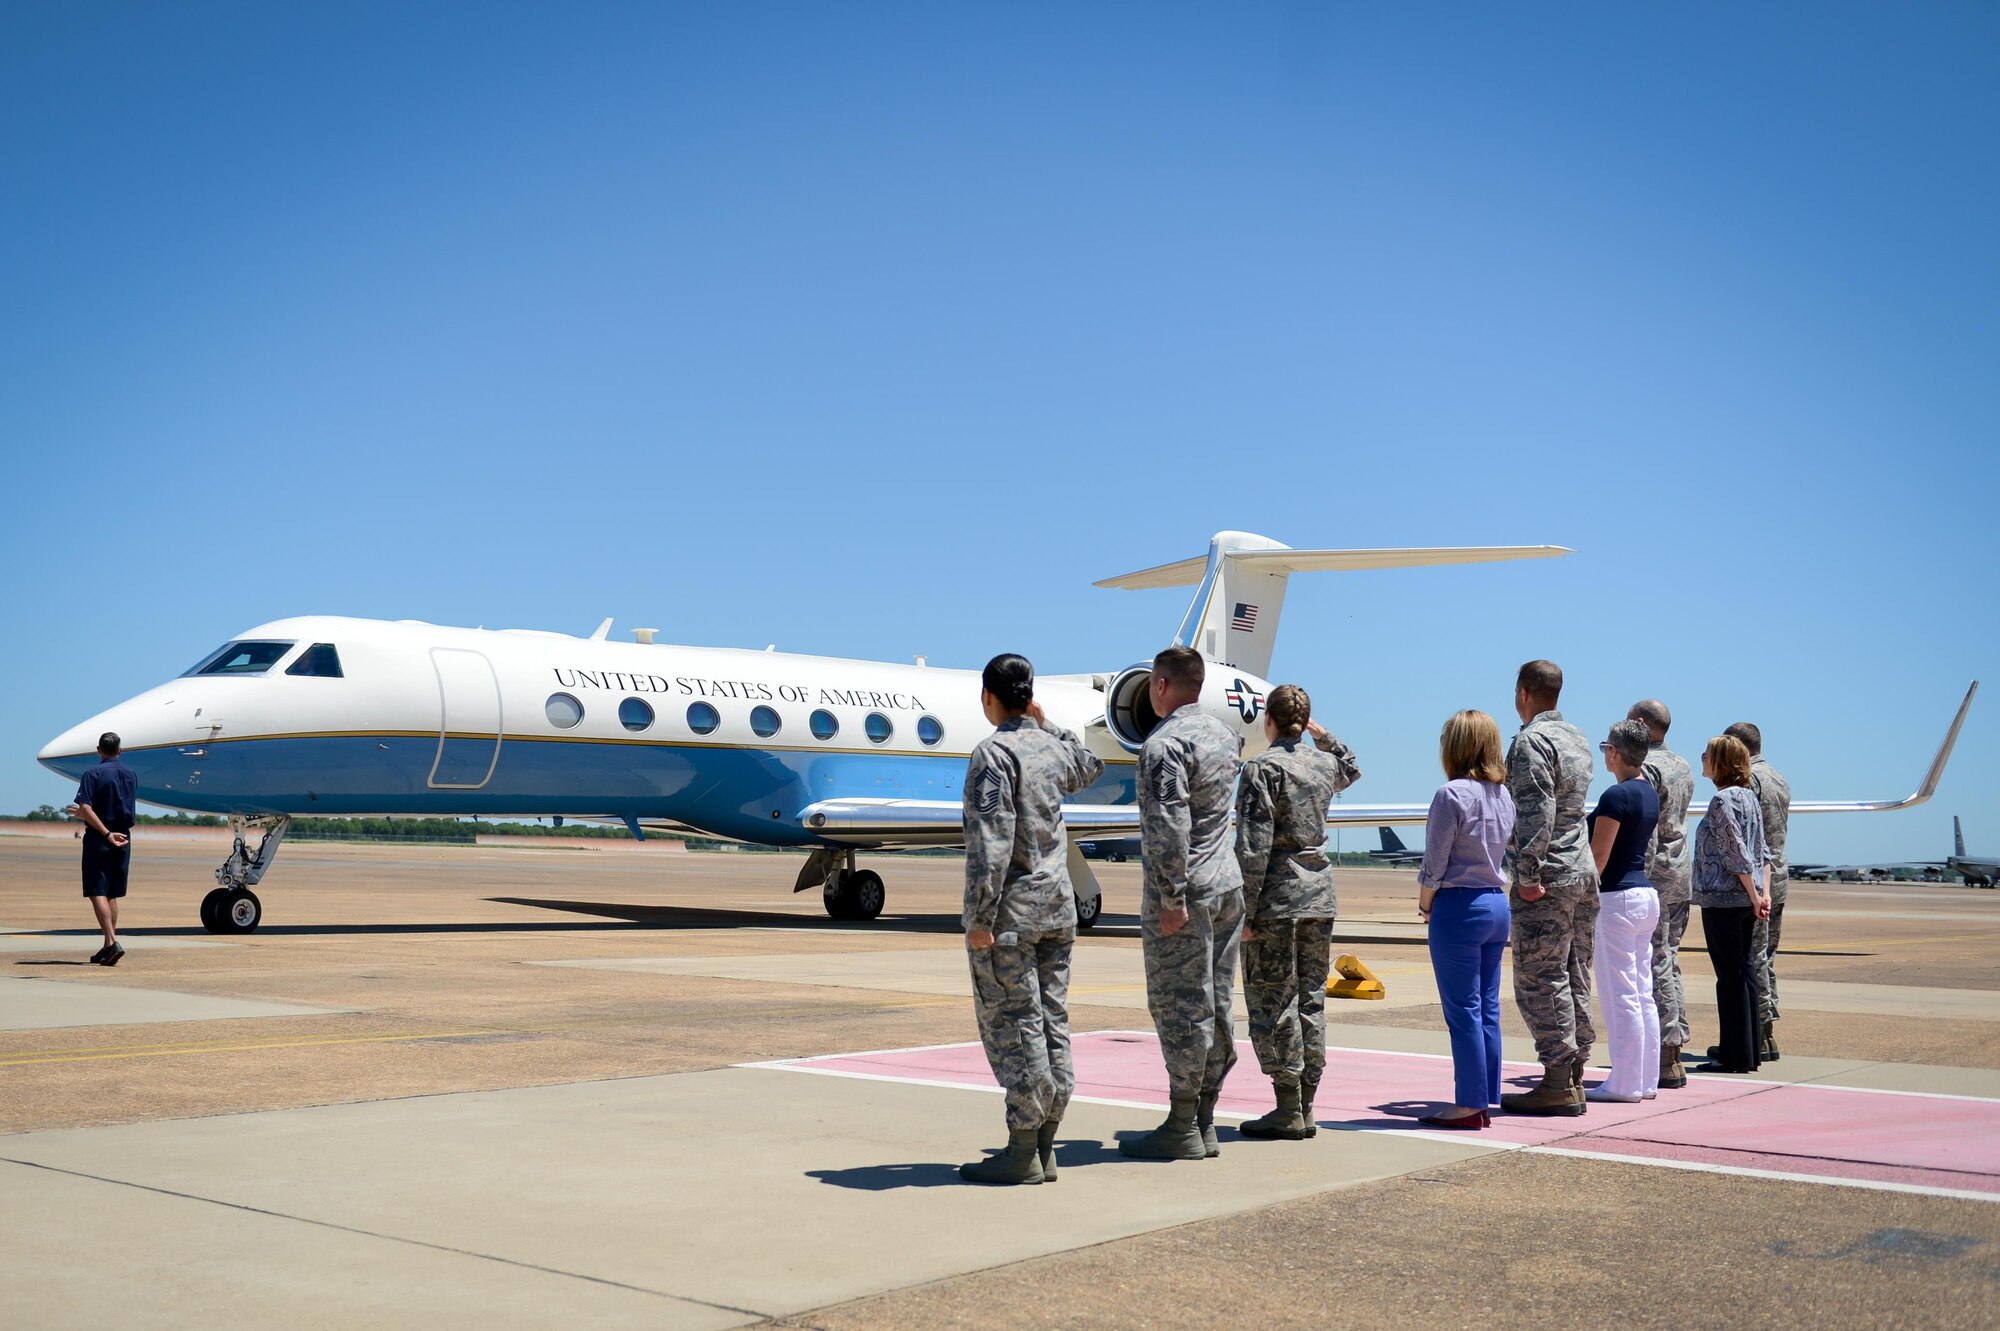 Barksdale’s senior leadership greet Gen. Paul J. Selva, vice chairman of the Joint Chiefs of Staff, upon arrival at Barksdale Air Force Base, La., May 1, 2017. Selva’s visit to Barksdale was part of a nuclear enterprise immersion tour where he spent the afternoon with Airmen from Air Force Global Strike Command, 8th Air Force and 2nd Bomb Wing. Barksdale’s senior leaders discussed with Selva the role Barksdale plays in the U.S. deterrence mission and recent accomplishments of units at Barksdale and within Global Strike. (U.S. Air Force photo/Senior Airman Mozer O. Da Cunha)